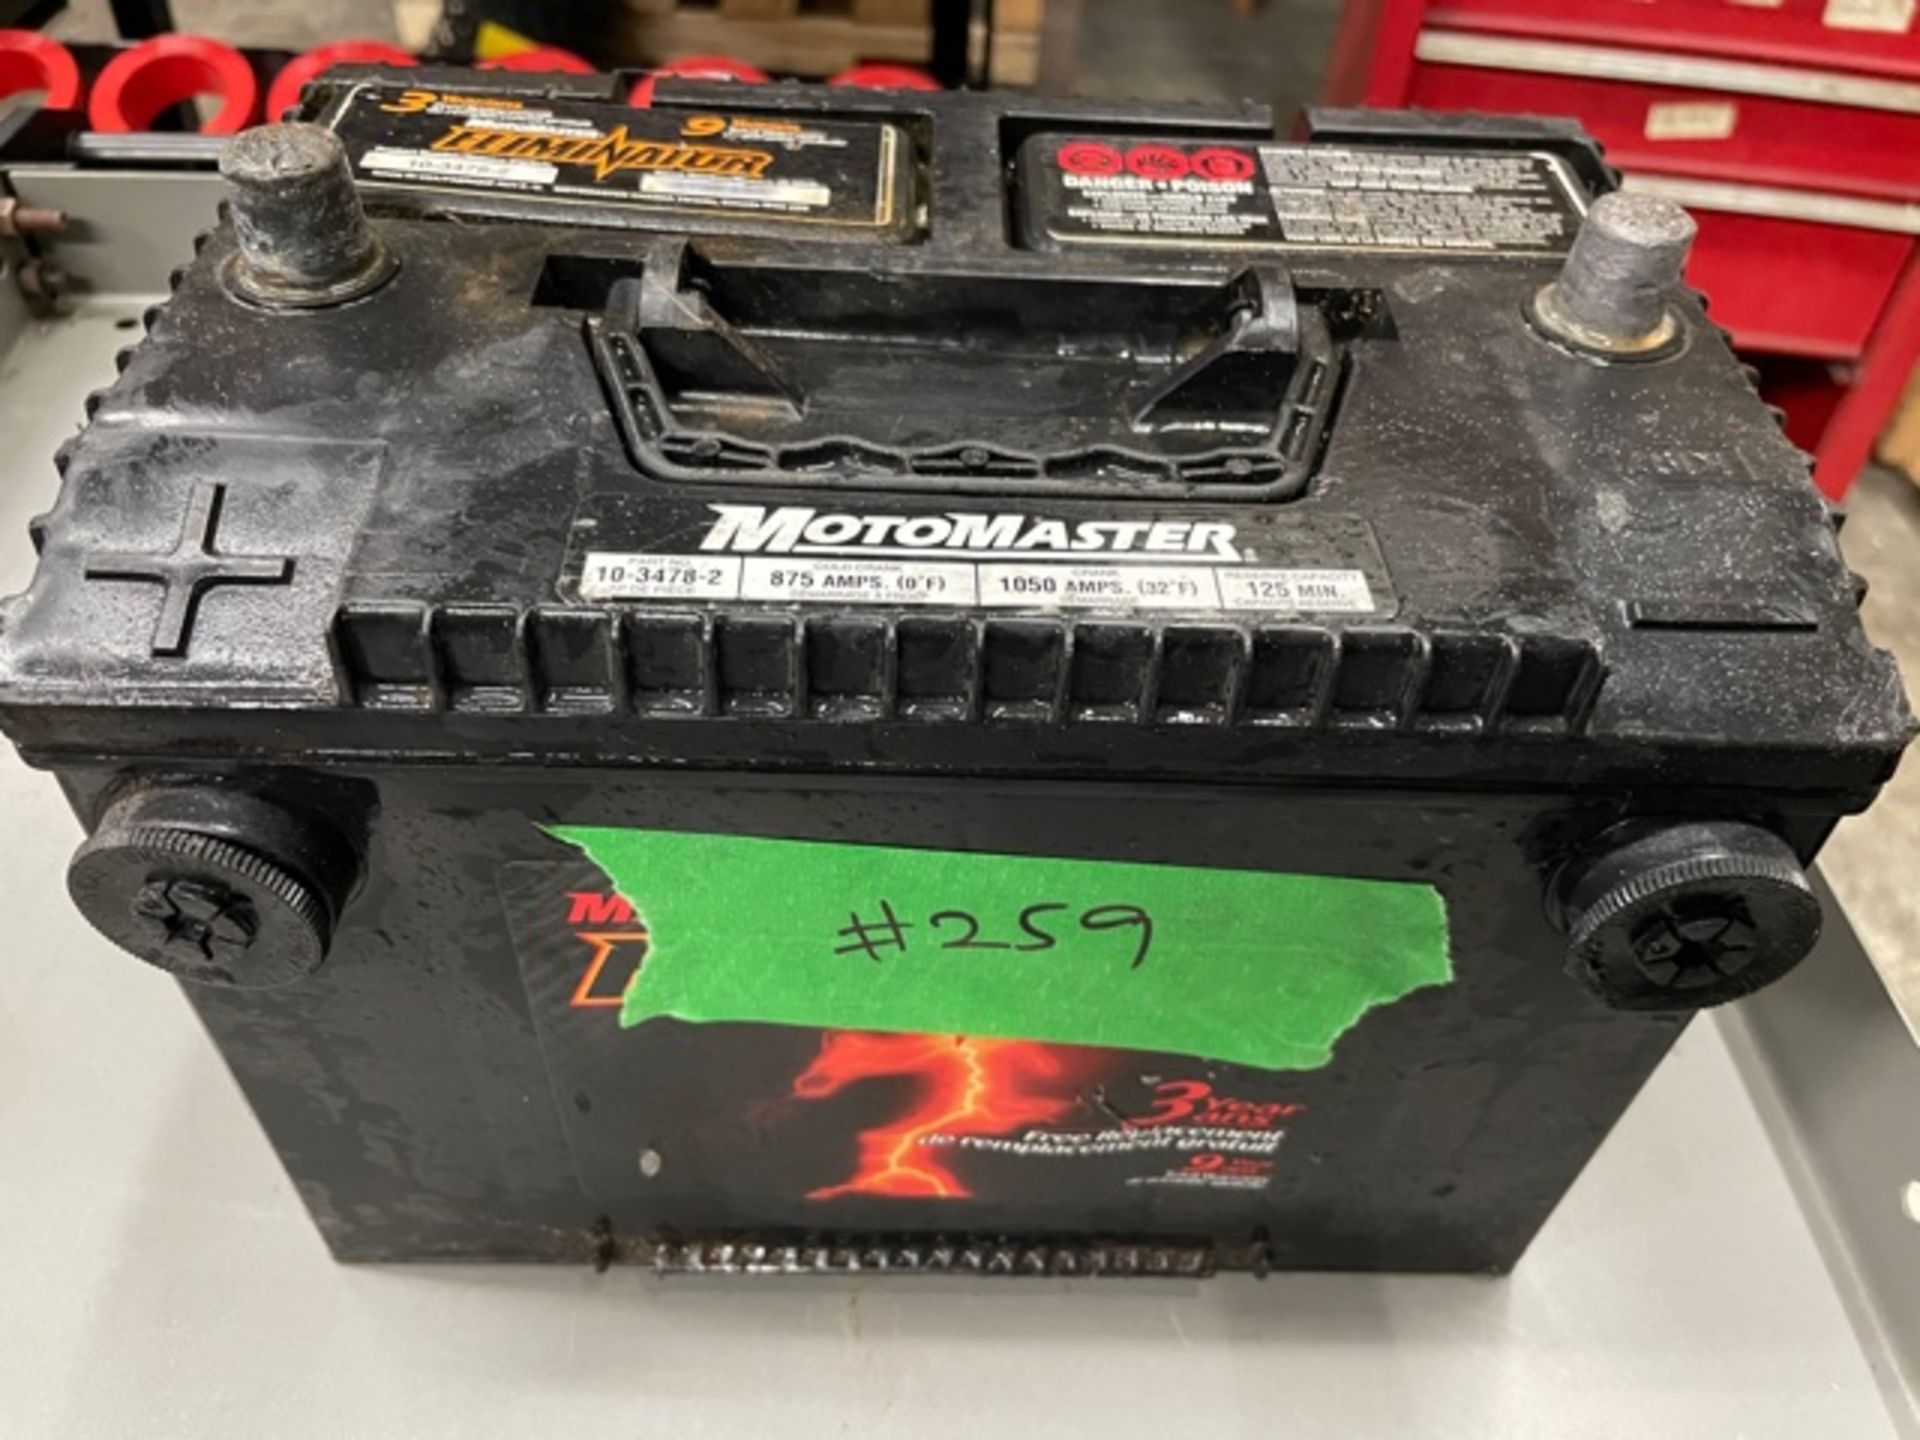 Battery - Brand new, Never been used